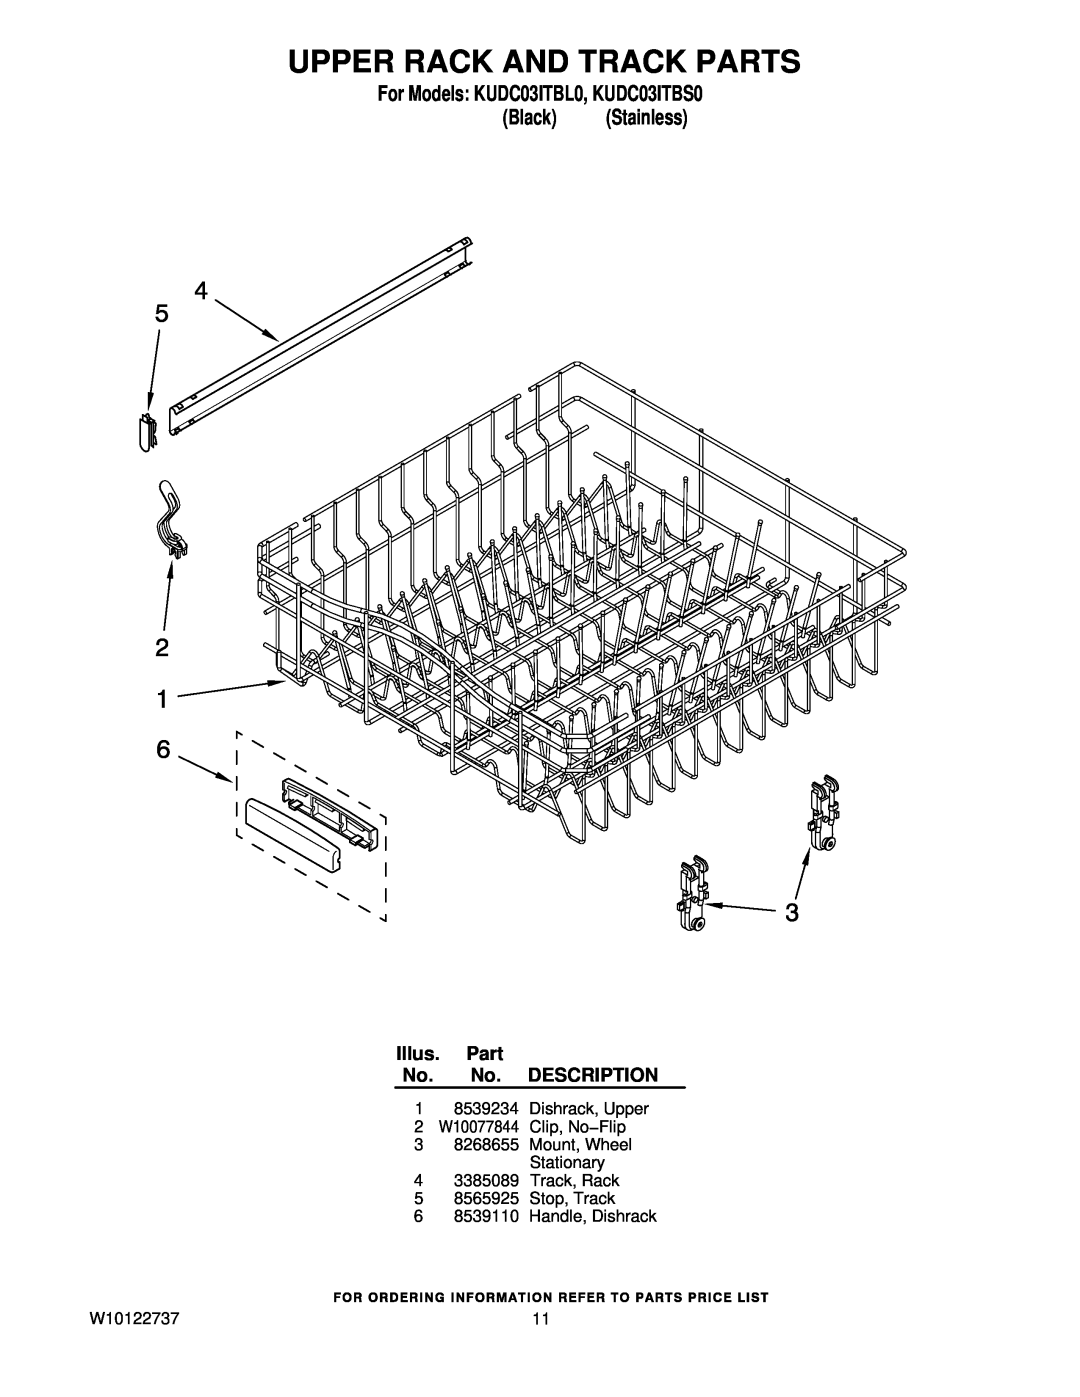 KitchenAid manual Upper Rack And Track Parts, For Models KUDC03ITBL0, KUDC03ITBS0 Black Stainless 